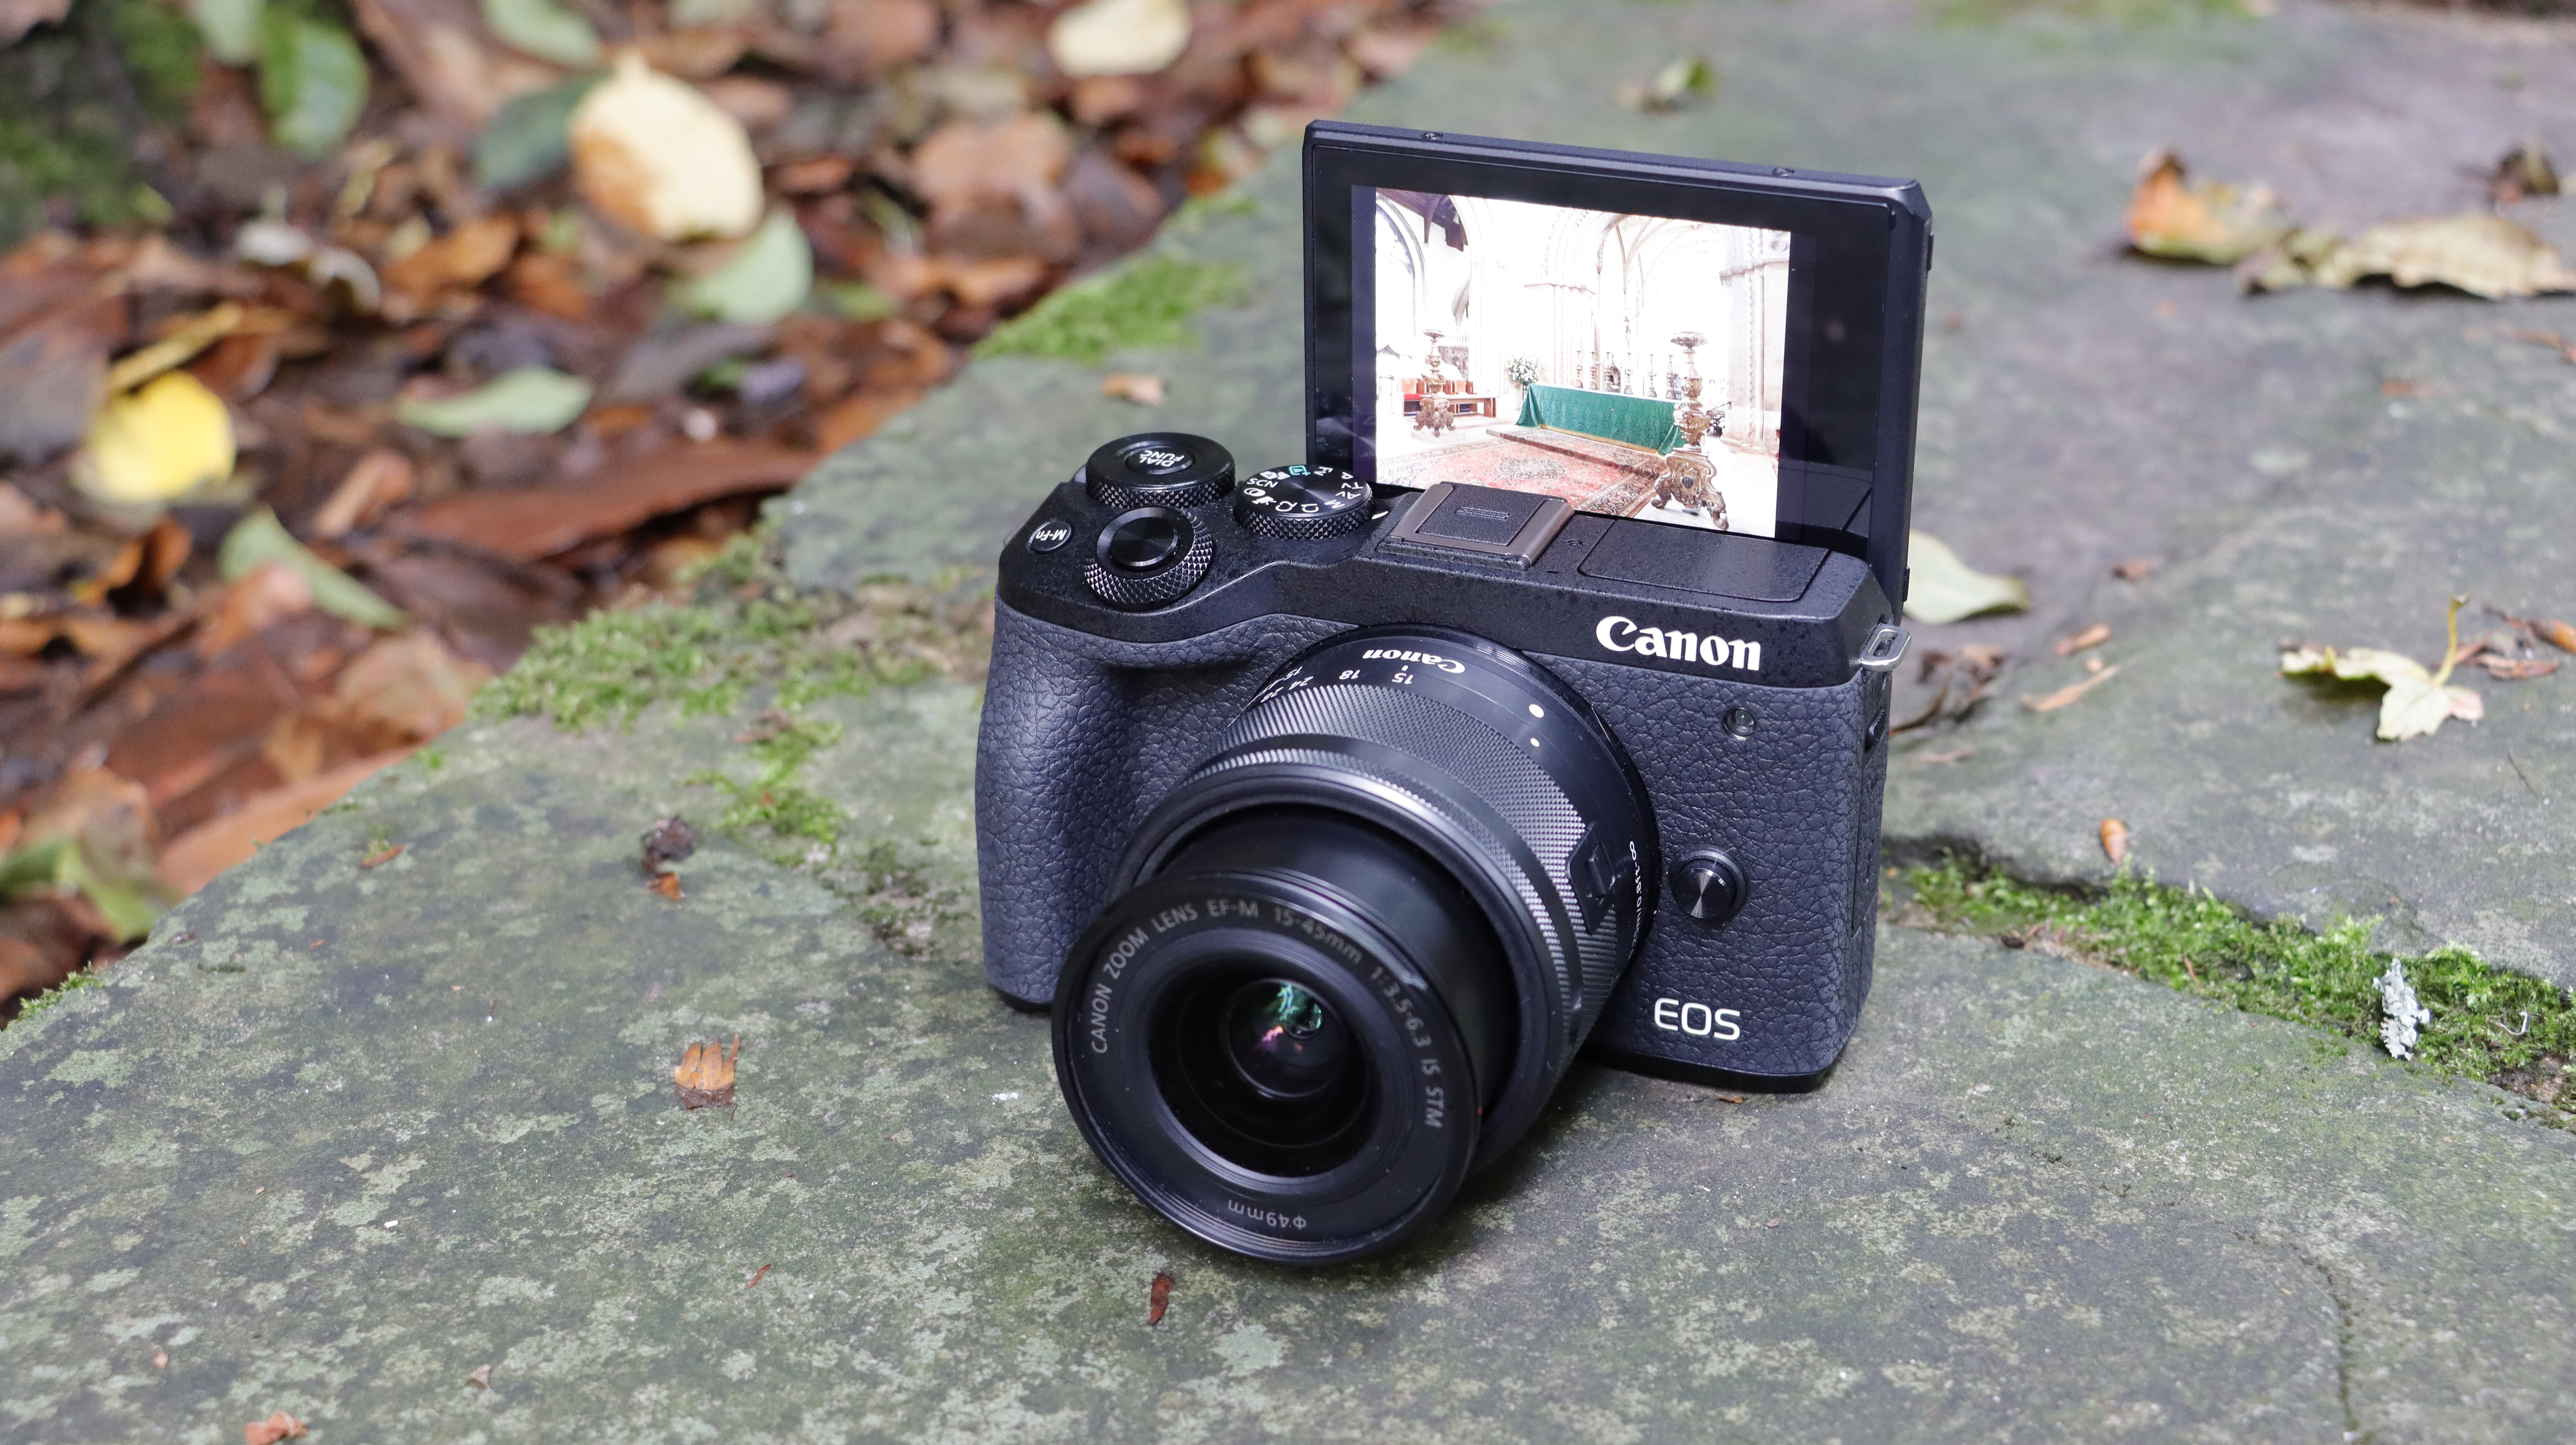 The Canon EOS M6 Mark II sat on a pathway with its articulating screen flipped up and facing forward